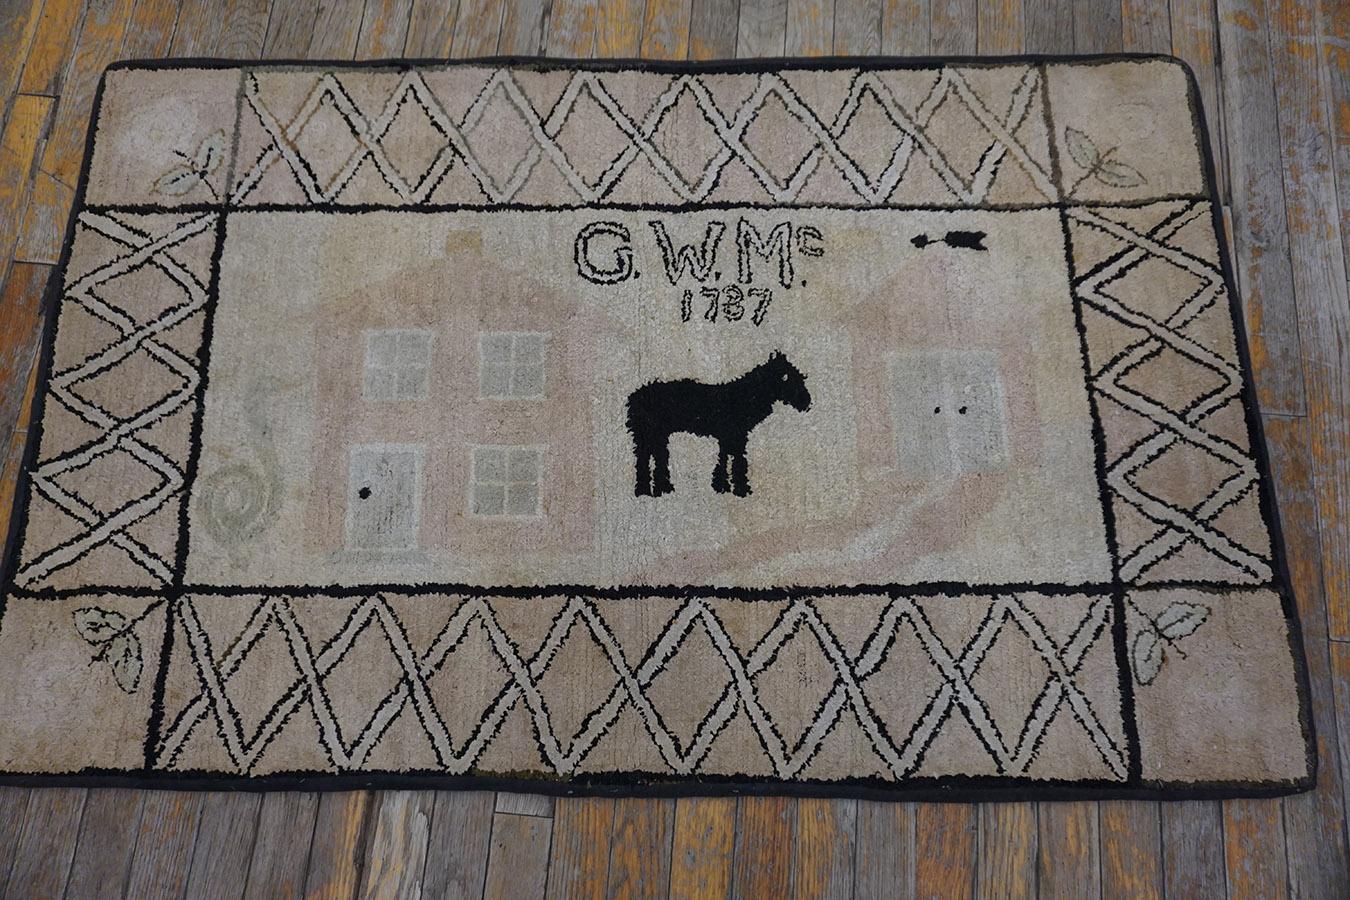 Hand-Woven Early 20th Century Pictorial American Hooked Rug ( 2'9